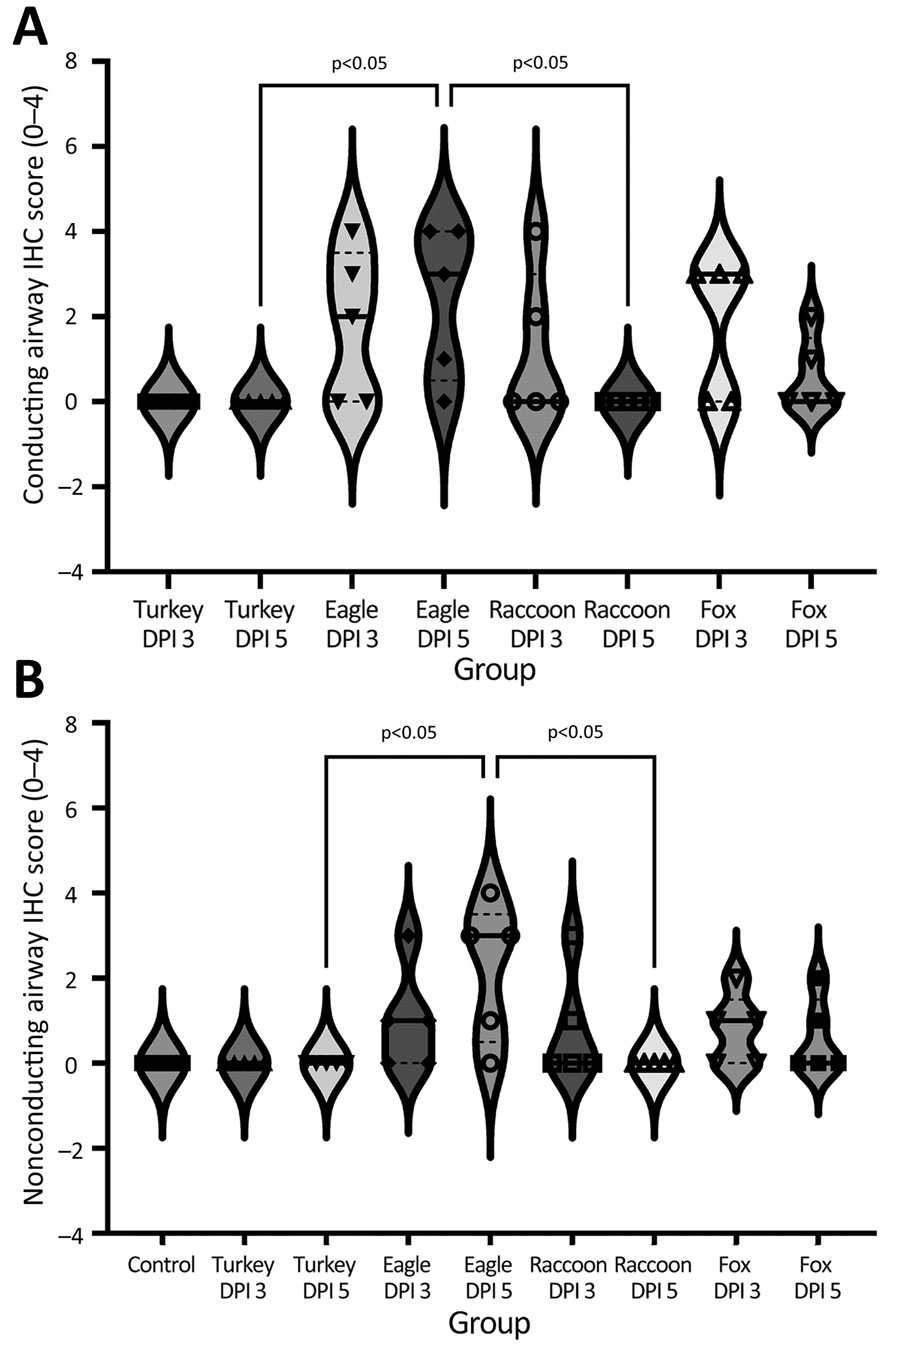 Violin plots of airway conducting IHC scores, by virus strain and dpi, of swine infected with highly pathogenic avian influenza A(H5N1) virus belonging to the goose/Guangdong 2.3.4.4b hemagglutinin phylogenetic clade. A) Lung conducting airway immunohistochemical scores. Influenza A virus (IAV) nucleoprotein (NP) antigen detection varied by group with the most extensive labeling (the number of positive pigs) being observed in the A/bald eagle/FL/22 and A/red fox/MI/22 groups. B) Lung nonconducting airway immunohistochemical scores. IAV NP antigen detection varied by group with the most extensive labeling being observed in the A/bald eagle/FL/22. Solid lines within plots indicate medians, dashed lines indicate quartiles, and symbols indicate individual pig values. dpi, days postinoculation; eagle 3 dpi, A/bald eagle/FL/22 necropsied at 3 dpi; eagle 5 dpi, A/bald eagle/FL/22 necropsied at 5 dpi; fox 3 dpi, A/redfox/MI/22 necropsied at 3 dpi; fox 5 dpi, A/redfox/MI/22 necropsied at 5 dpi; IHC, immunohistochemistry; racoon 3 dpi, A/raccoon/WA/22 necropsied at 3 dpi; racoon 5 dpi, A/raccoon/WA/22 necropsied at 5 dpi; turkey 3 dpi, A/turkey/MN/22 necropsied at 3 dpi; turkey 5 dpi, A/turkey/MN/22 necropsied at 5 dpi.